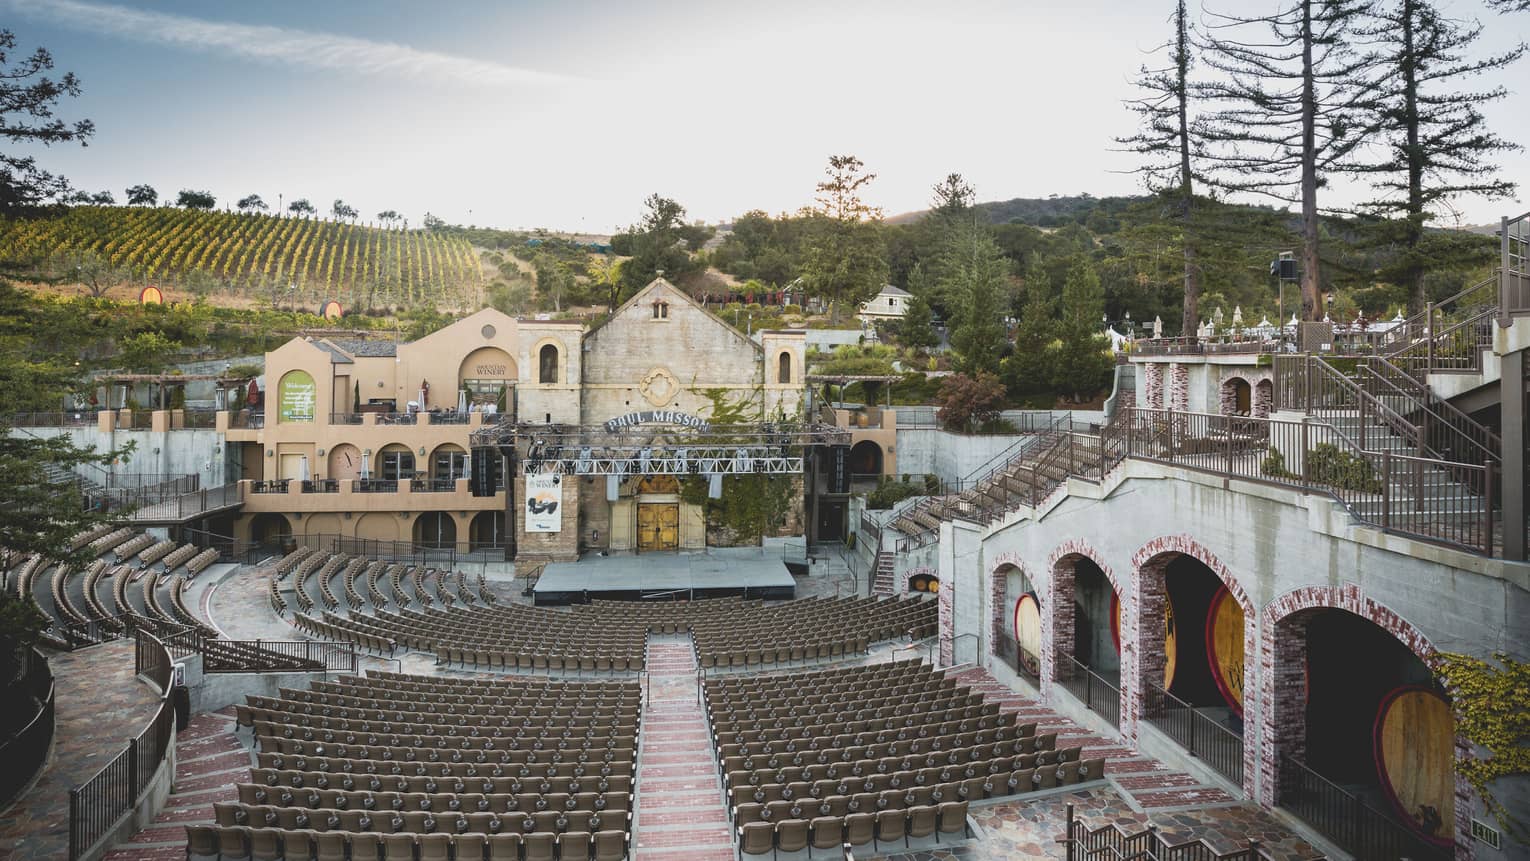 A large outdoor concert venue surrounded by old buildings and a winery.